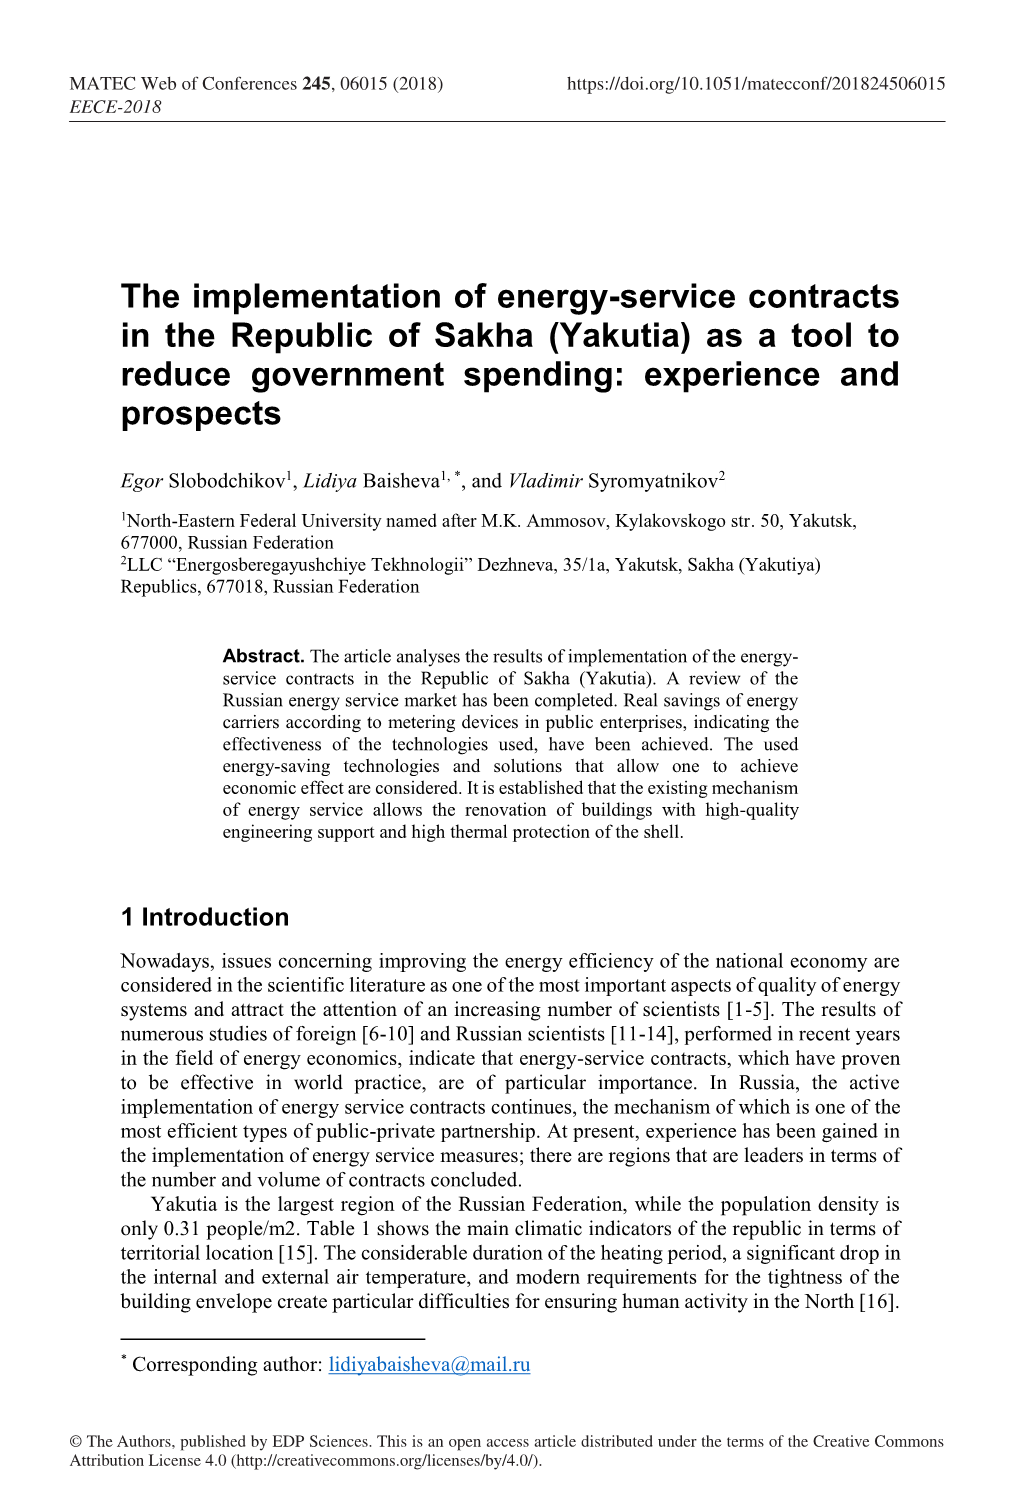 The Implementation of Energy-Service Contracts in the Republic of Sakha (Yakutia) As a Tool to Reduce Government Spending: Experience and Prospects